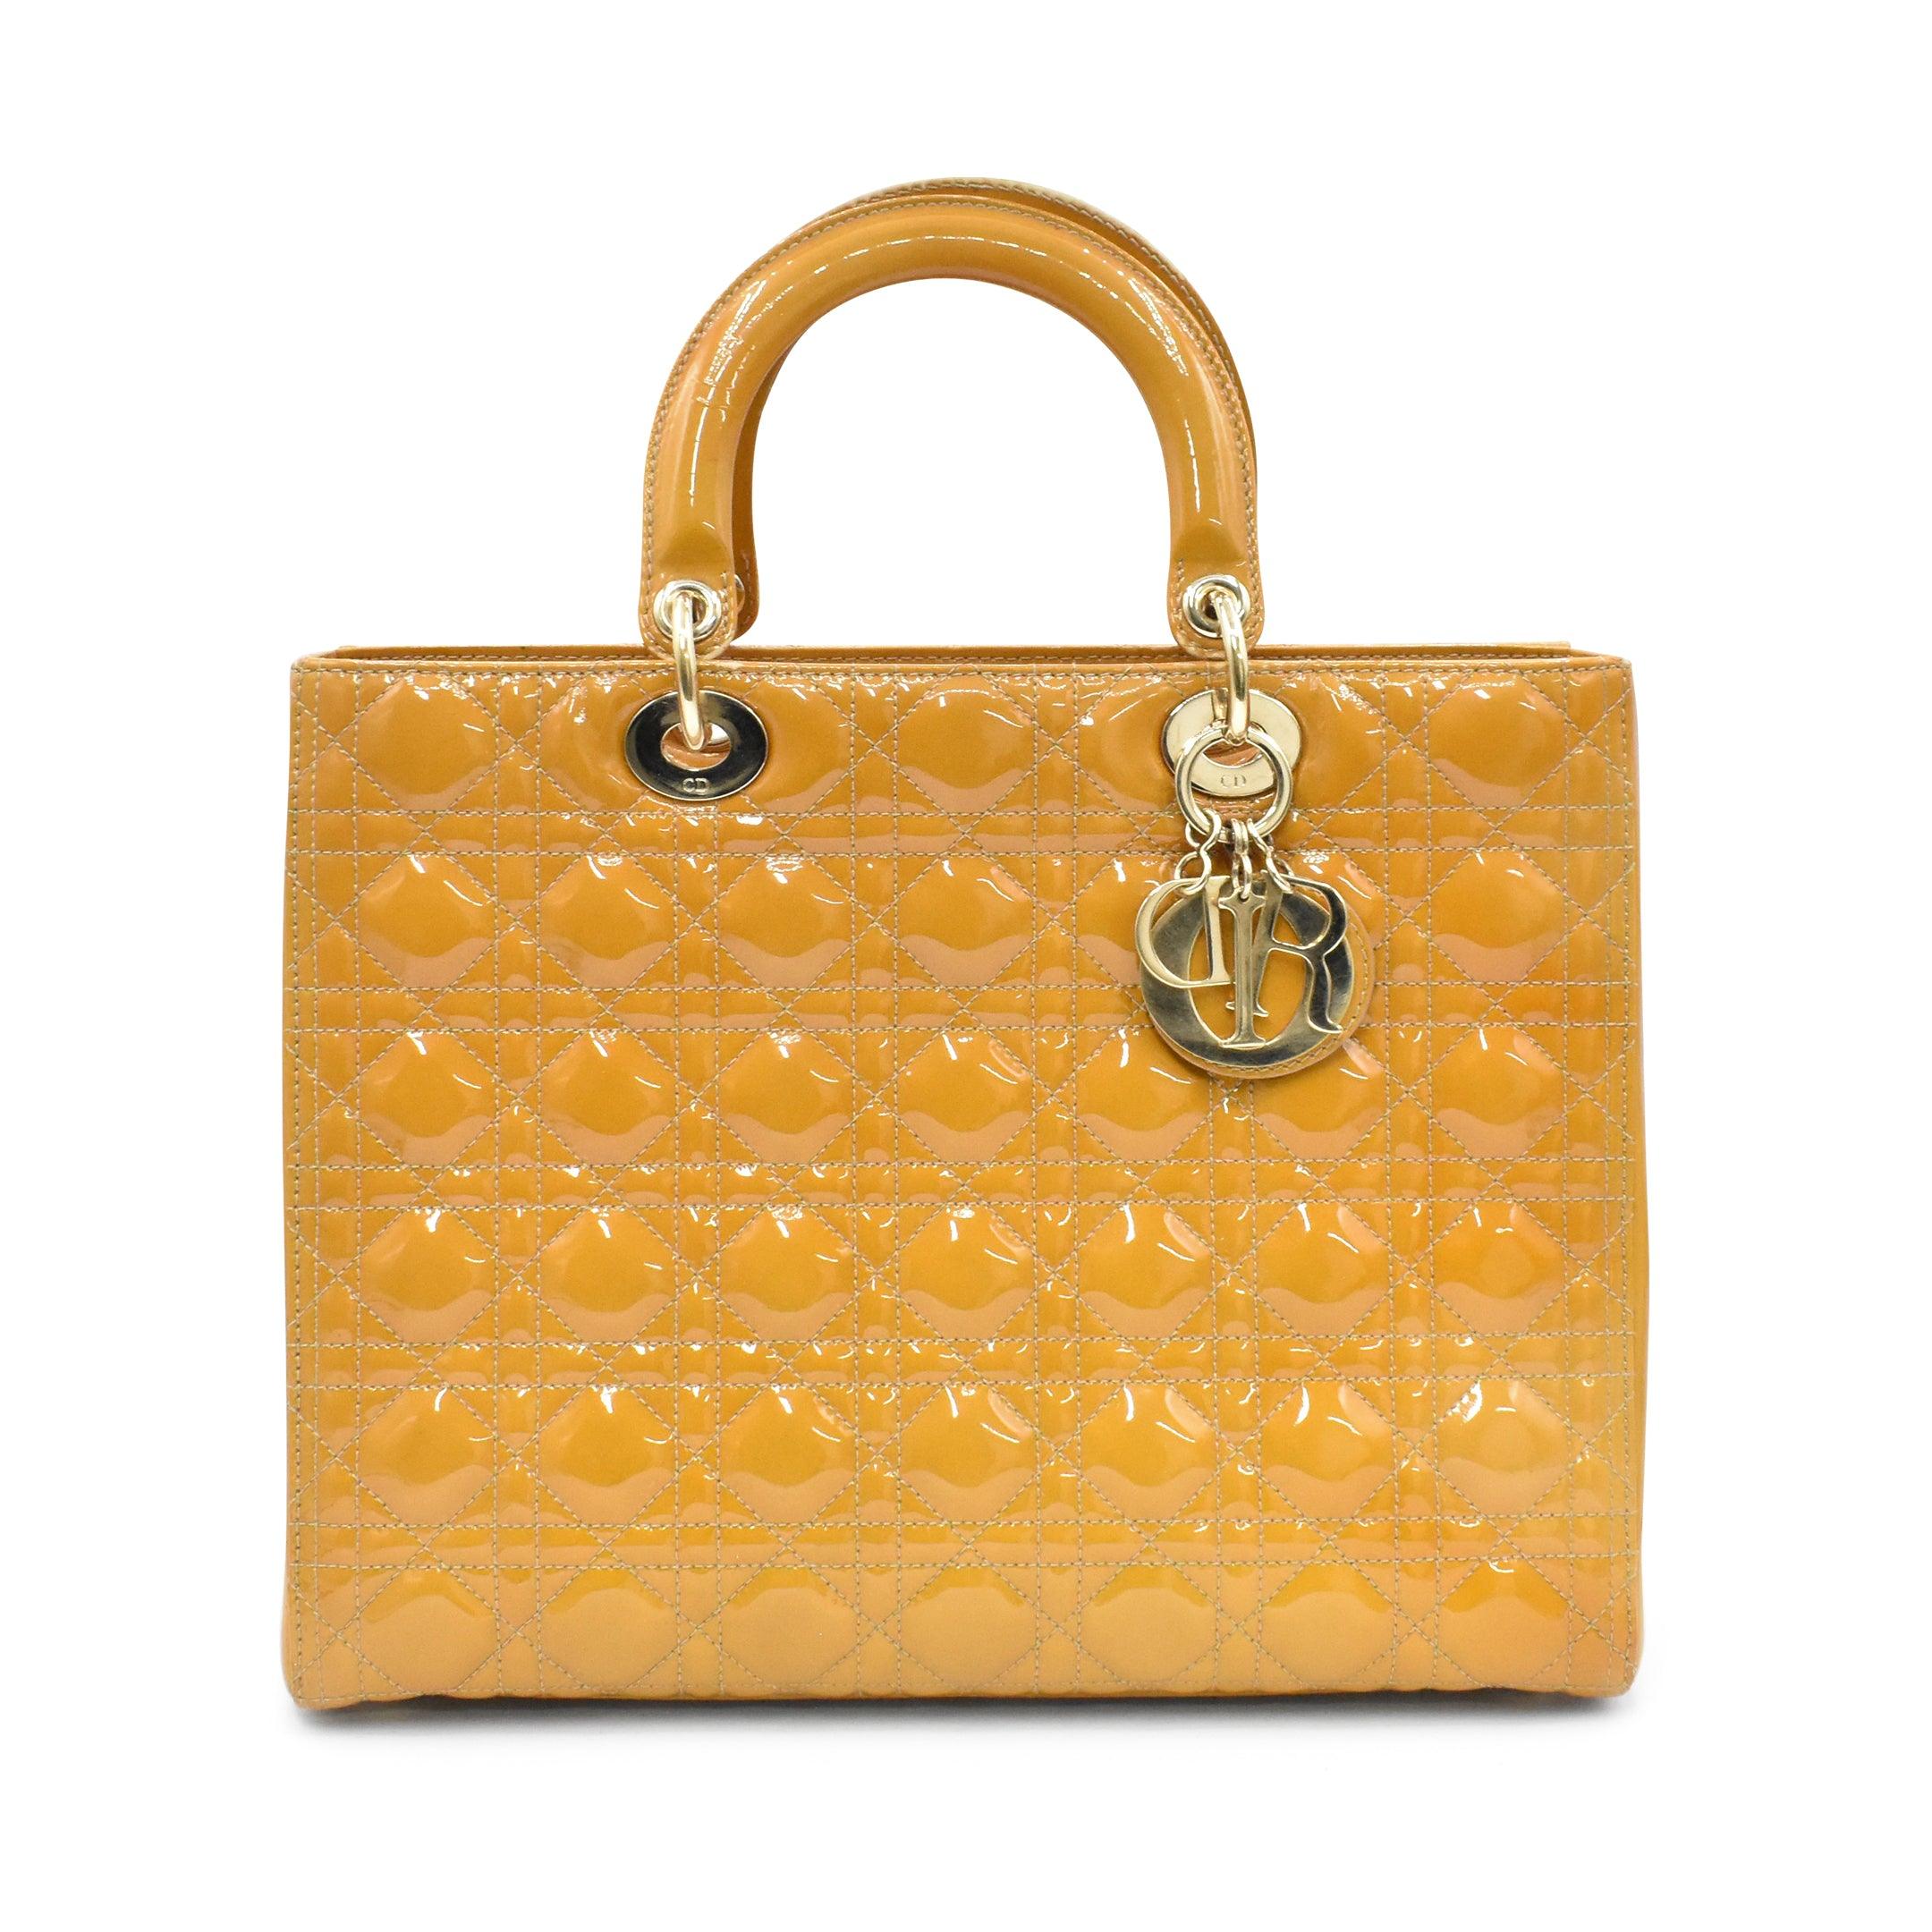 Christian Dior 'Large Lady Dior' Bag - Fashionably Yours